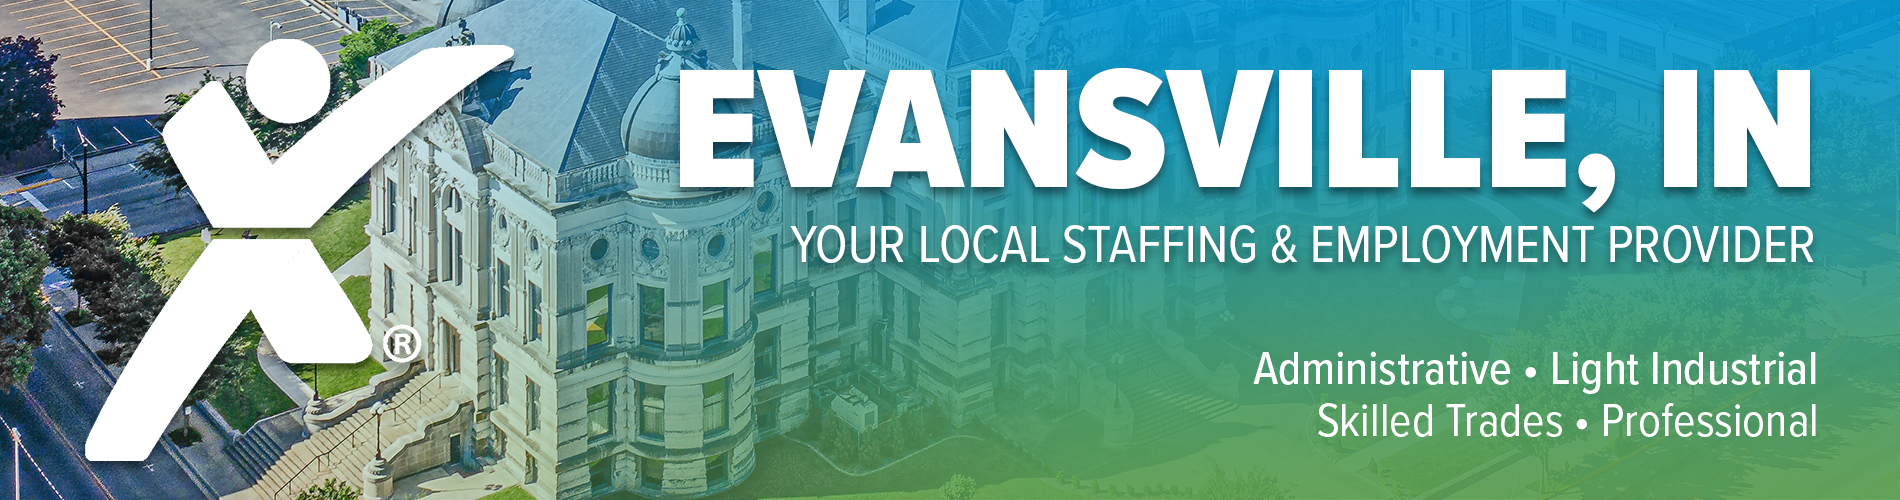 Your Local Staffing & Employment Providers in Evansville, IN